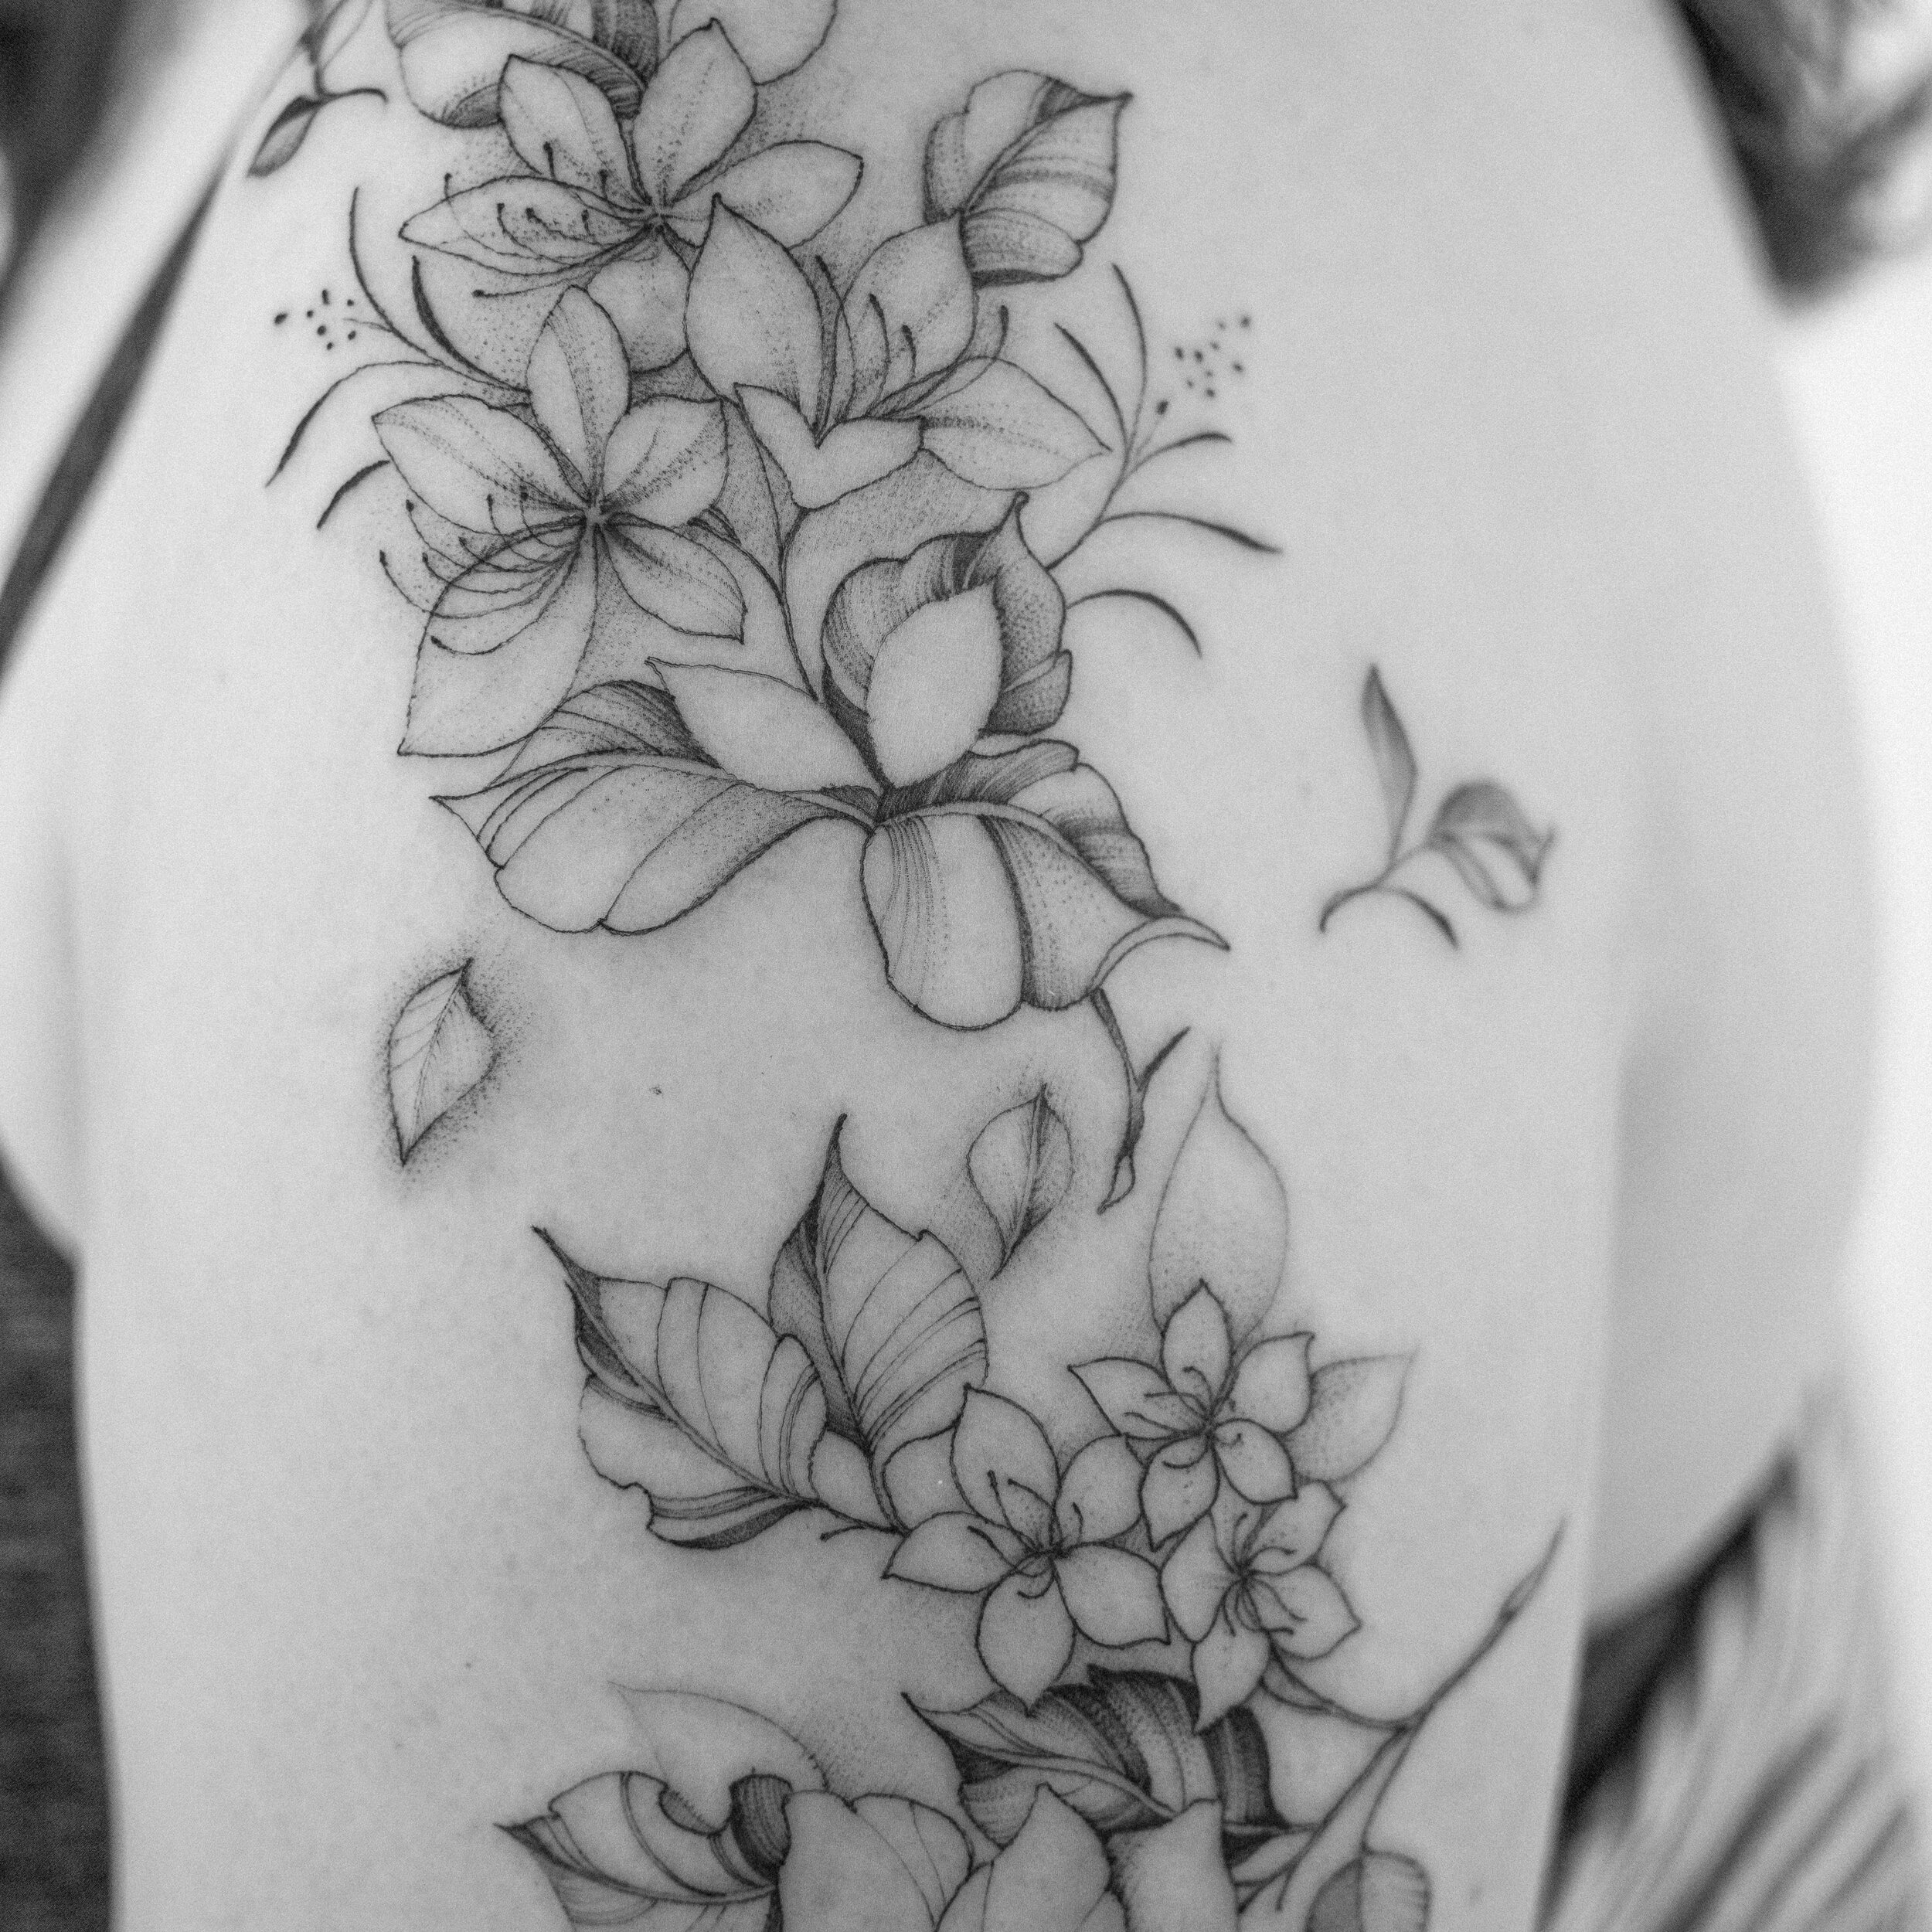 Details on a recent floral half sleeve. 

.

All likes, saves, comments, and shares are appreciated :). 

.

lornetattoos.ca for booking. 

.

#lornetattoos #finelinefloral #singleneedle #blackandgreytattoo #naturetattoo